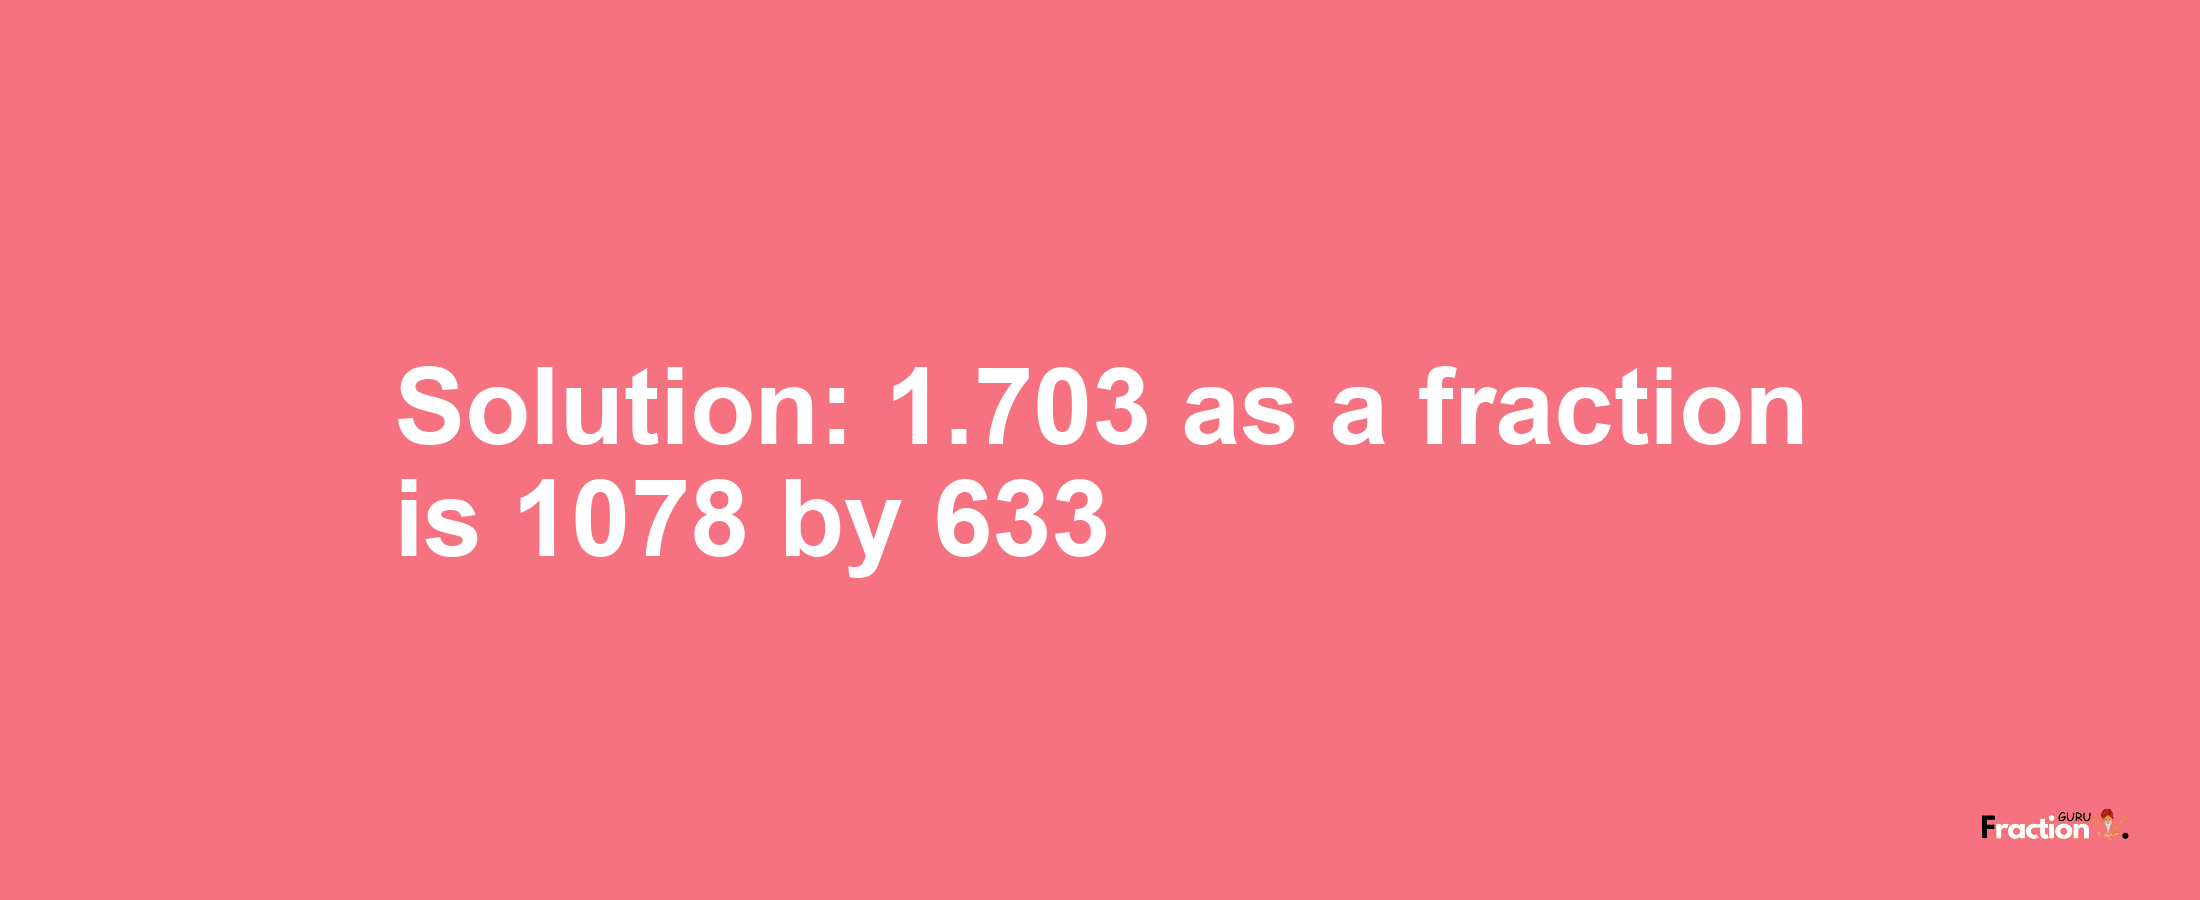 Solution:1.703 as a fraction is 1078/633